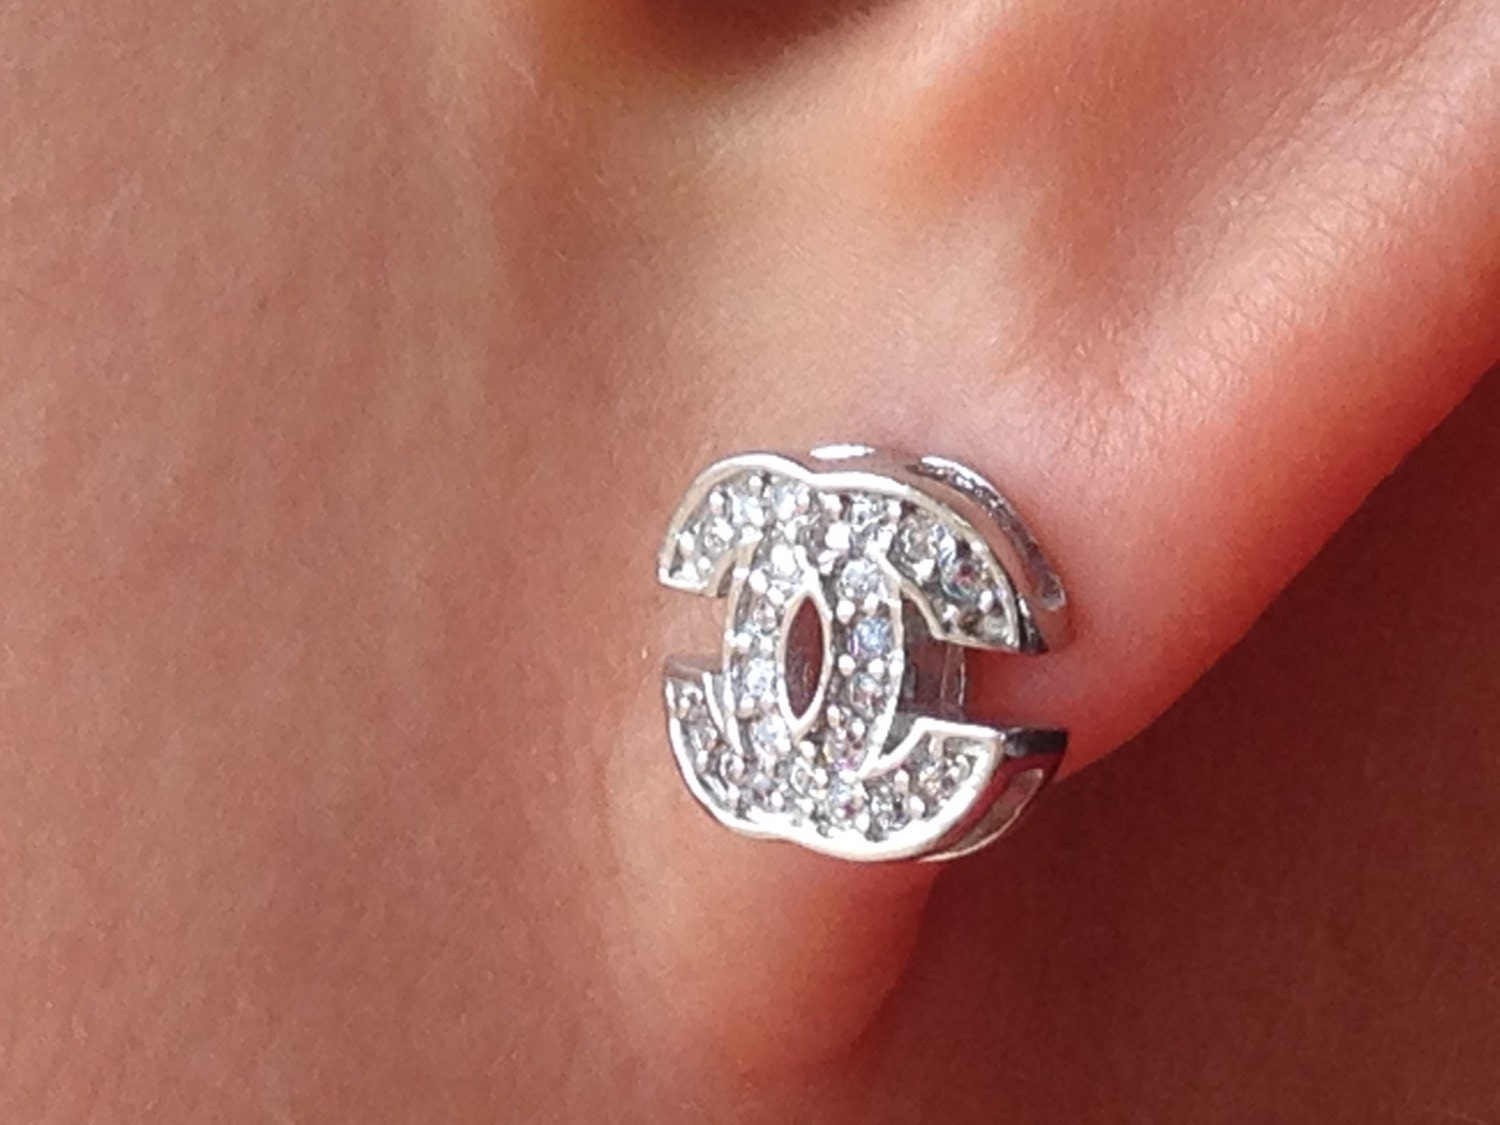 Chanel Style Earrings Sparkly CZ Diamond 14K White Gold